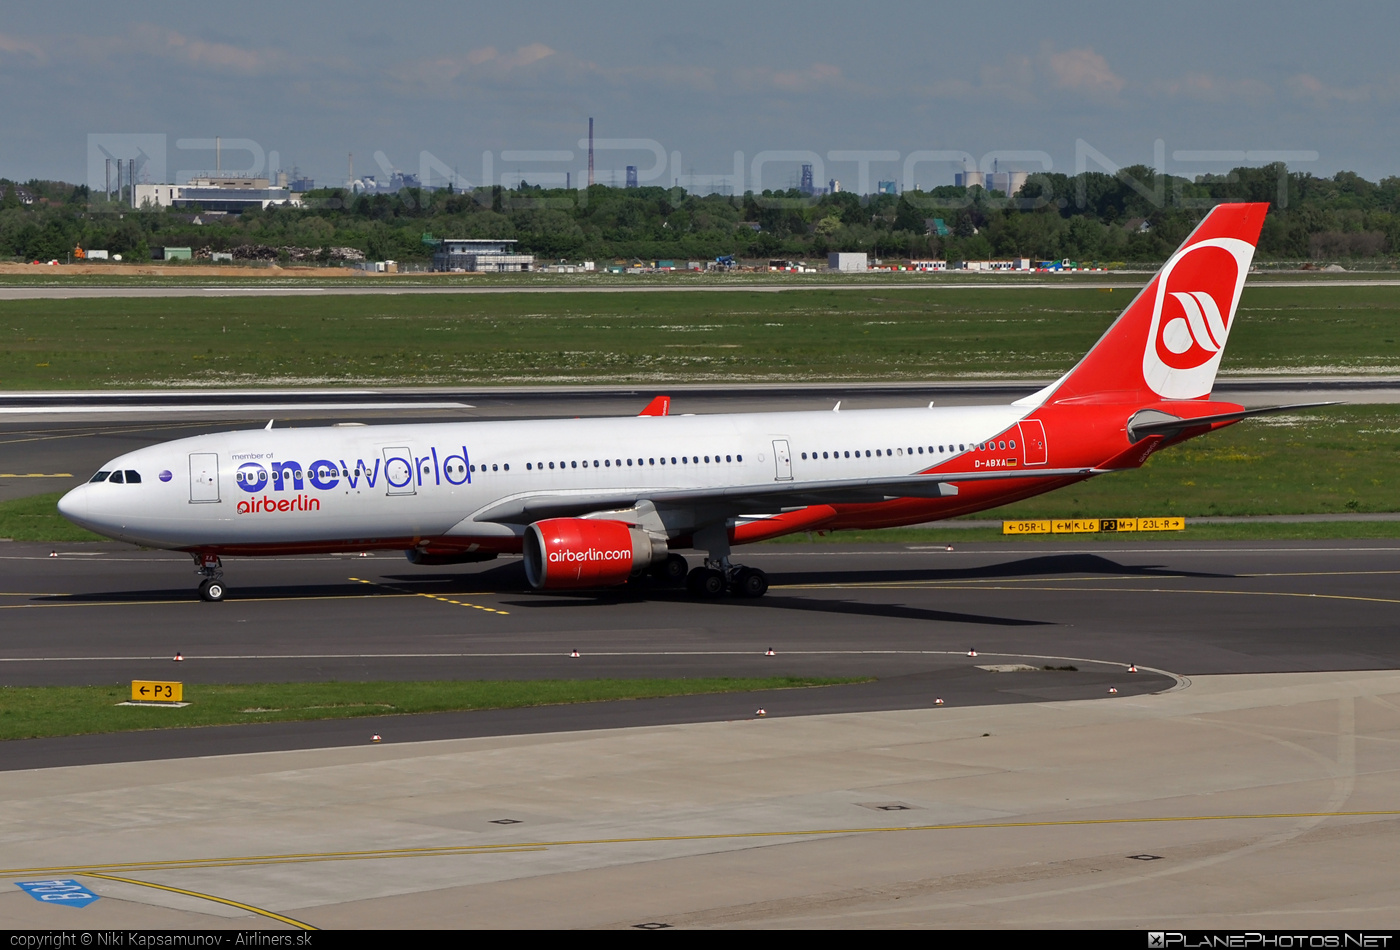 Airbus A330-223 - D-ABXA operated by Air Berlin #a330 #a330family #airberlin #airbus #airbus330 #oneworld